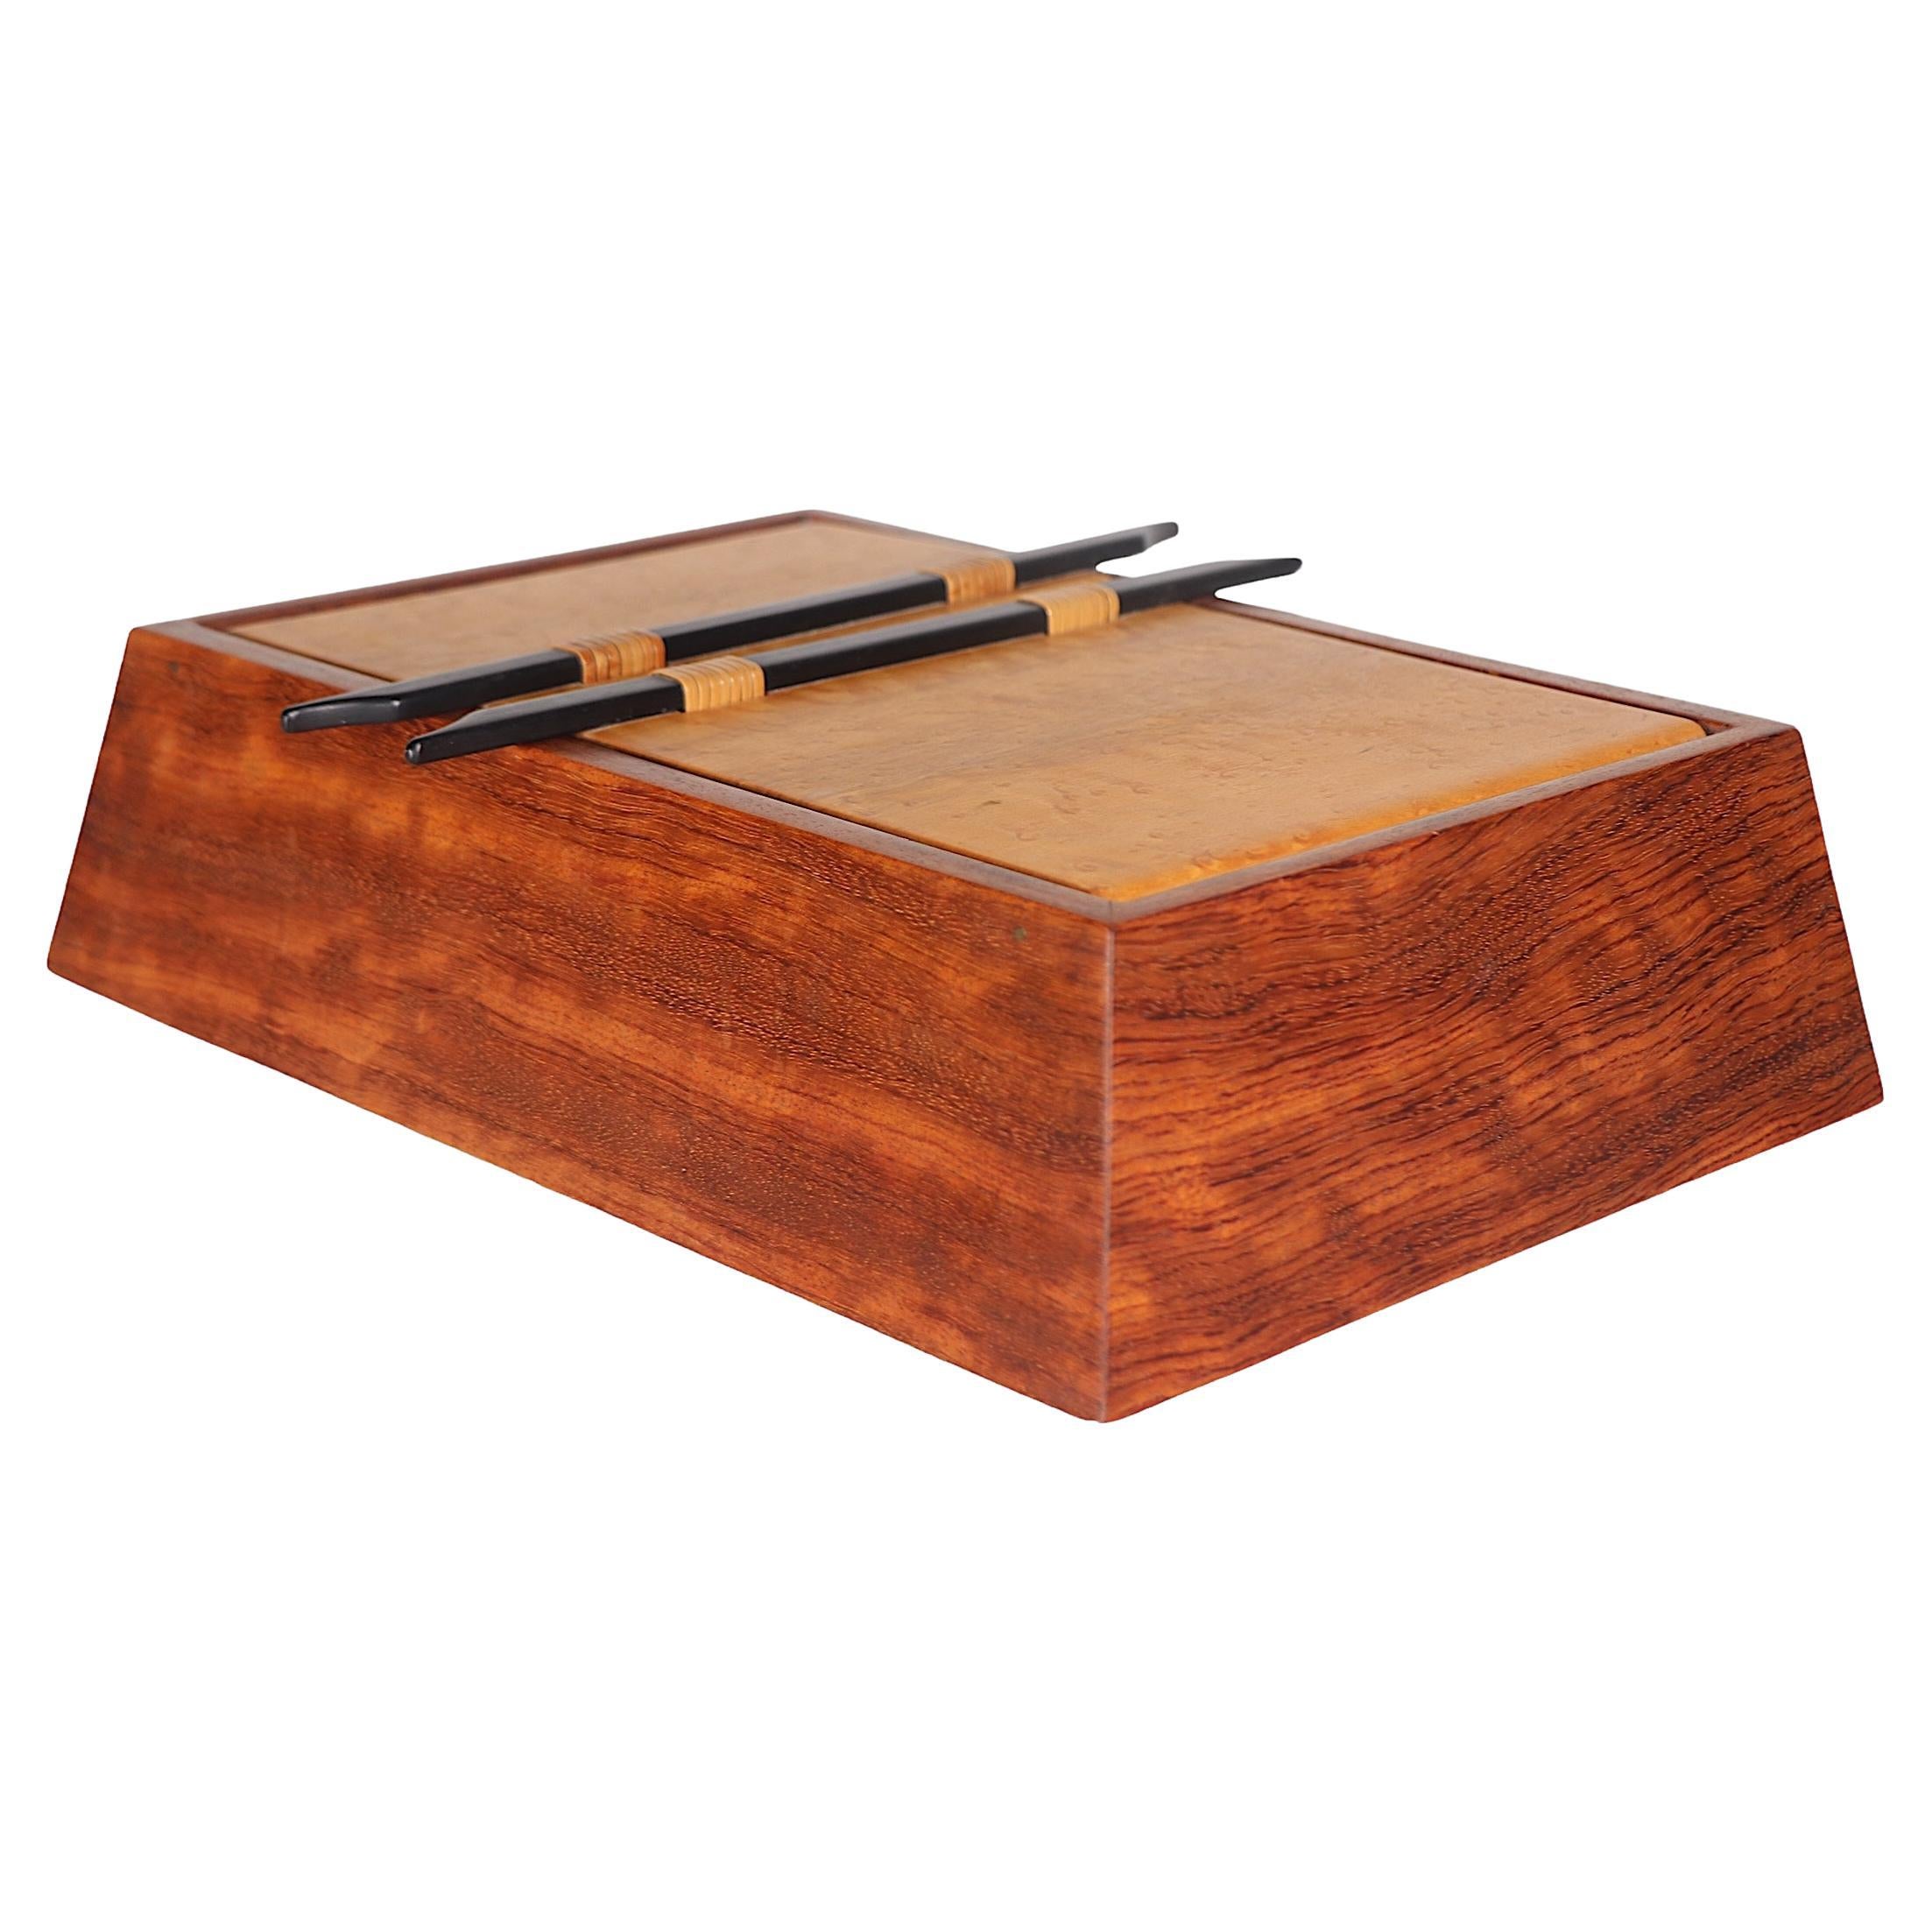 Exceptional hand made wood jewelry box by noted California artist Larry Dern, circa 1980's. The box features two burl swing open doors at the top which open to reveal a sliding jewelry and removable tray, with a suede lined bottom. The case has